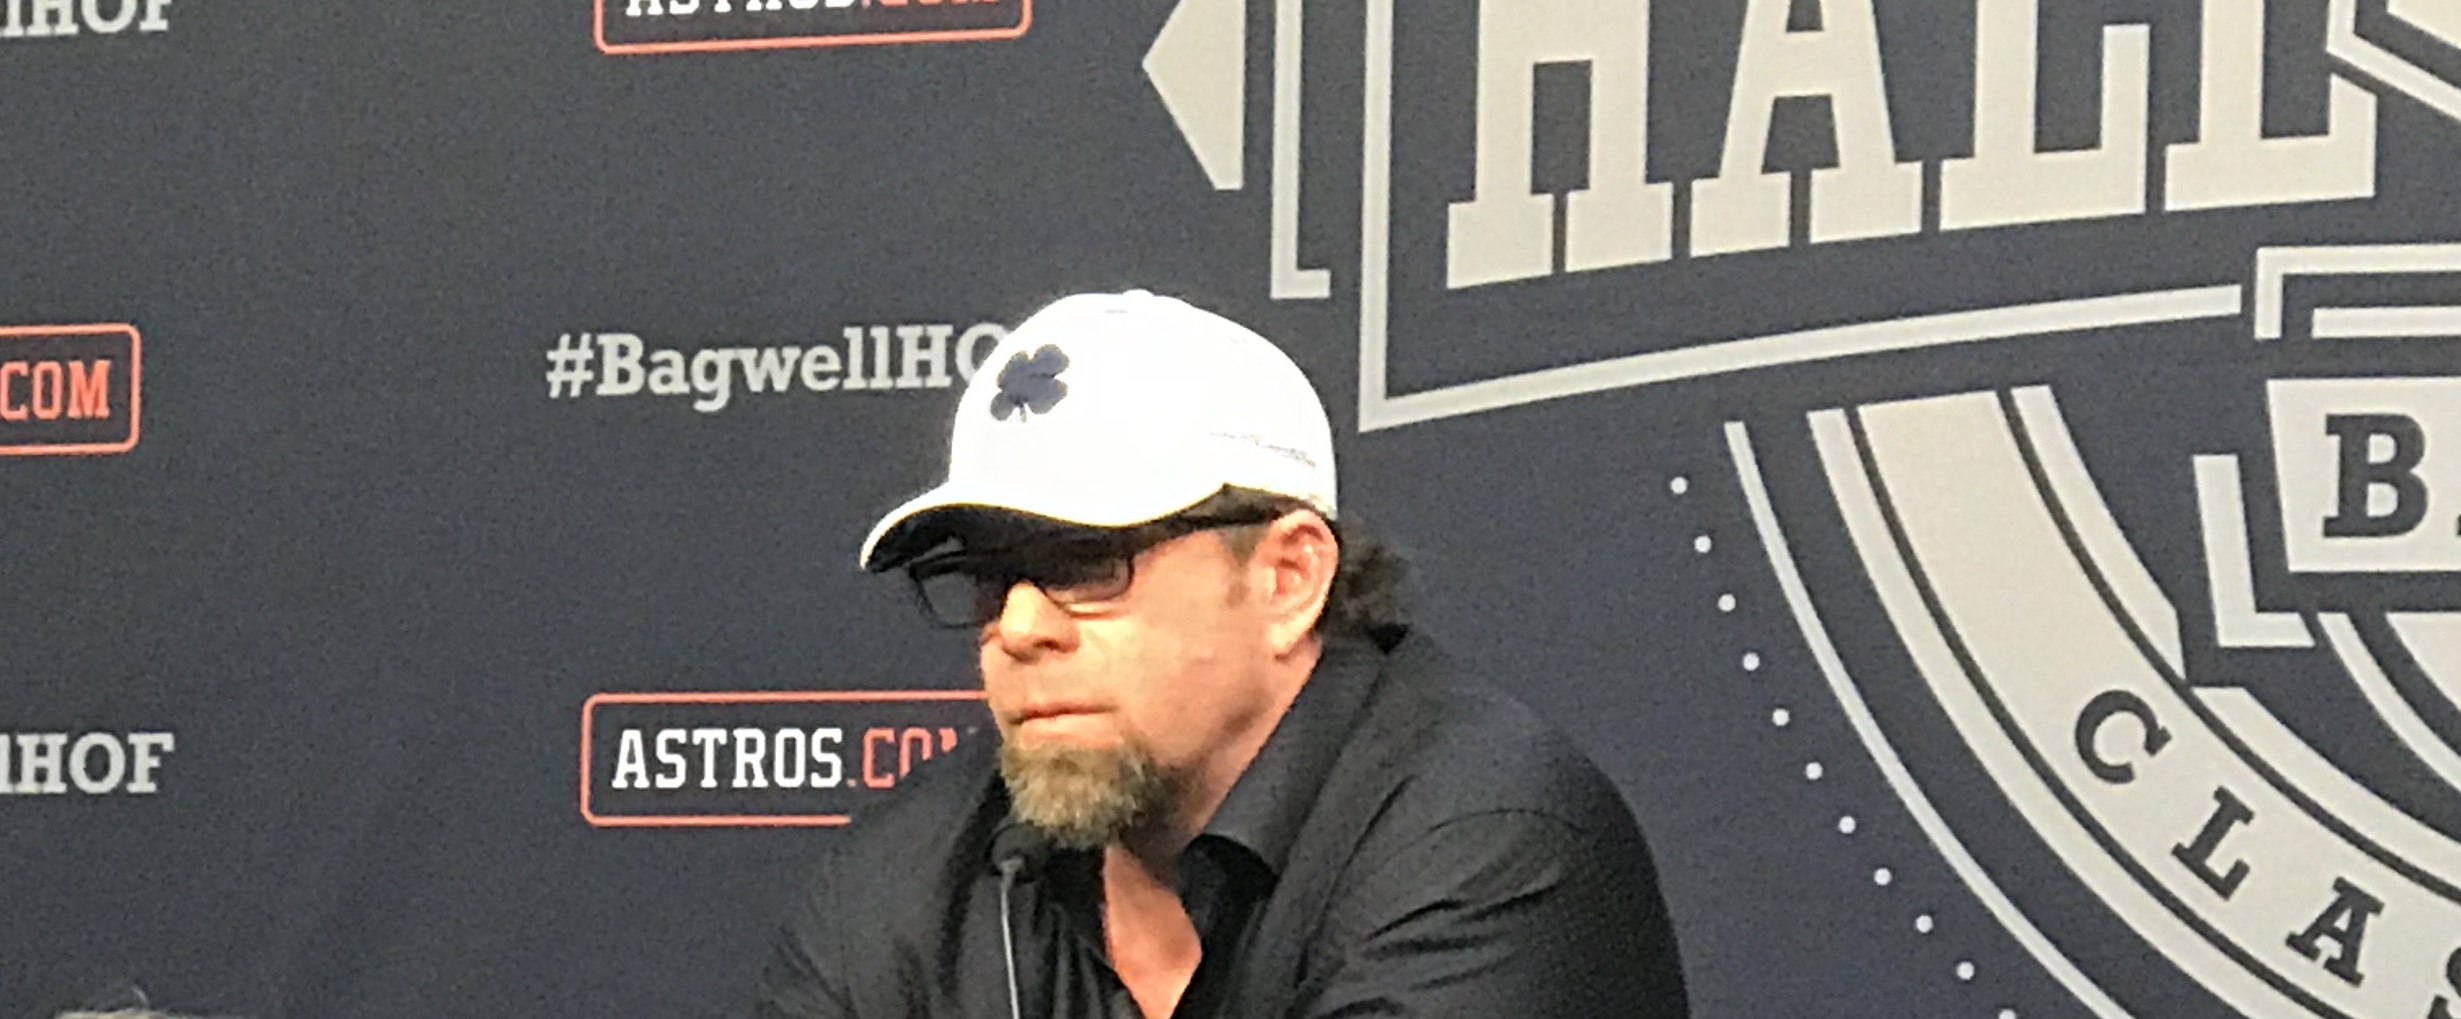 Jeff Bagwell, Astros legend and Baseball Hall of Famer, calls